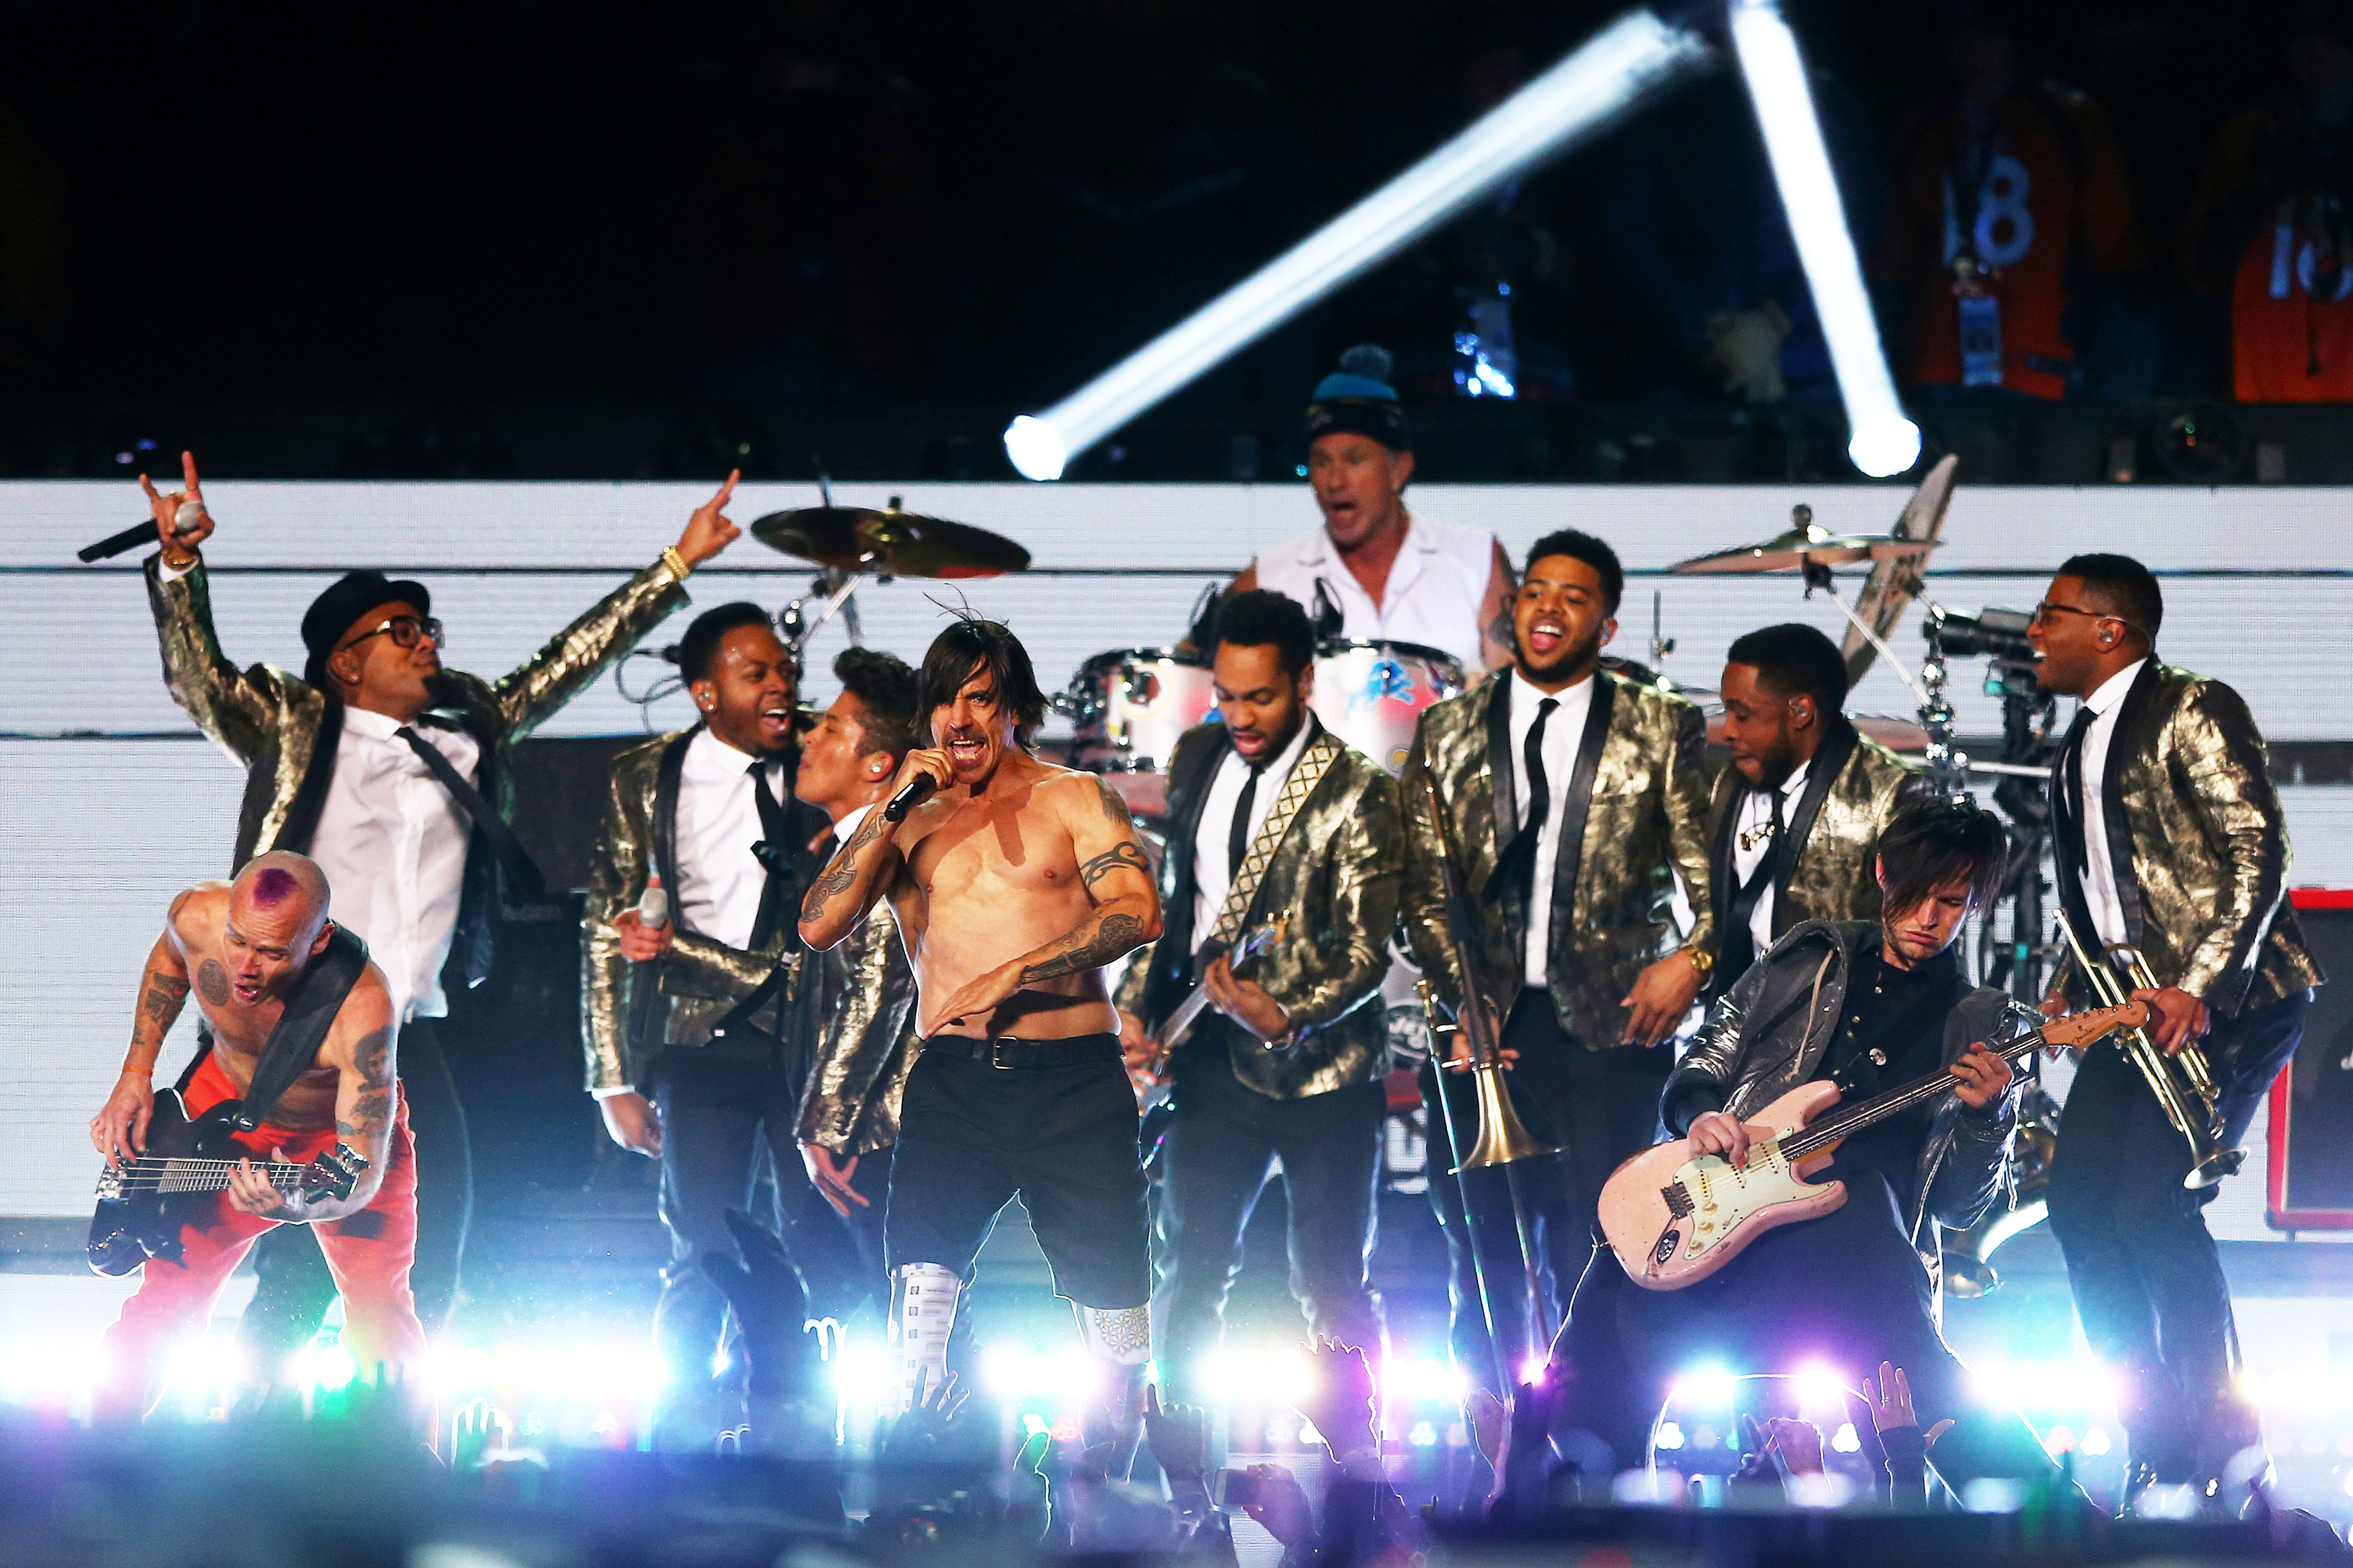 Bruno Mars and the Red Hot Chili Peppers perform during Super Bowl XLVIII on Feb. 2, 2014 in East Rutherford, N.J.